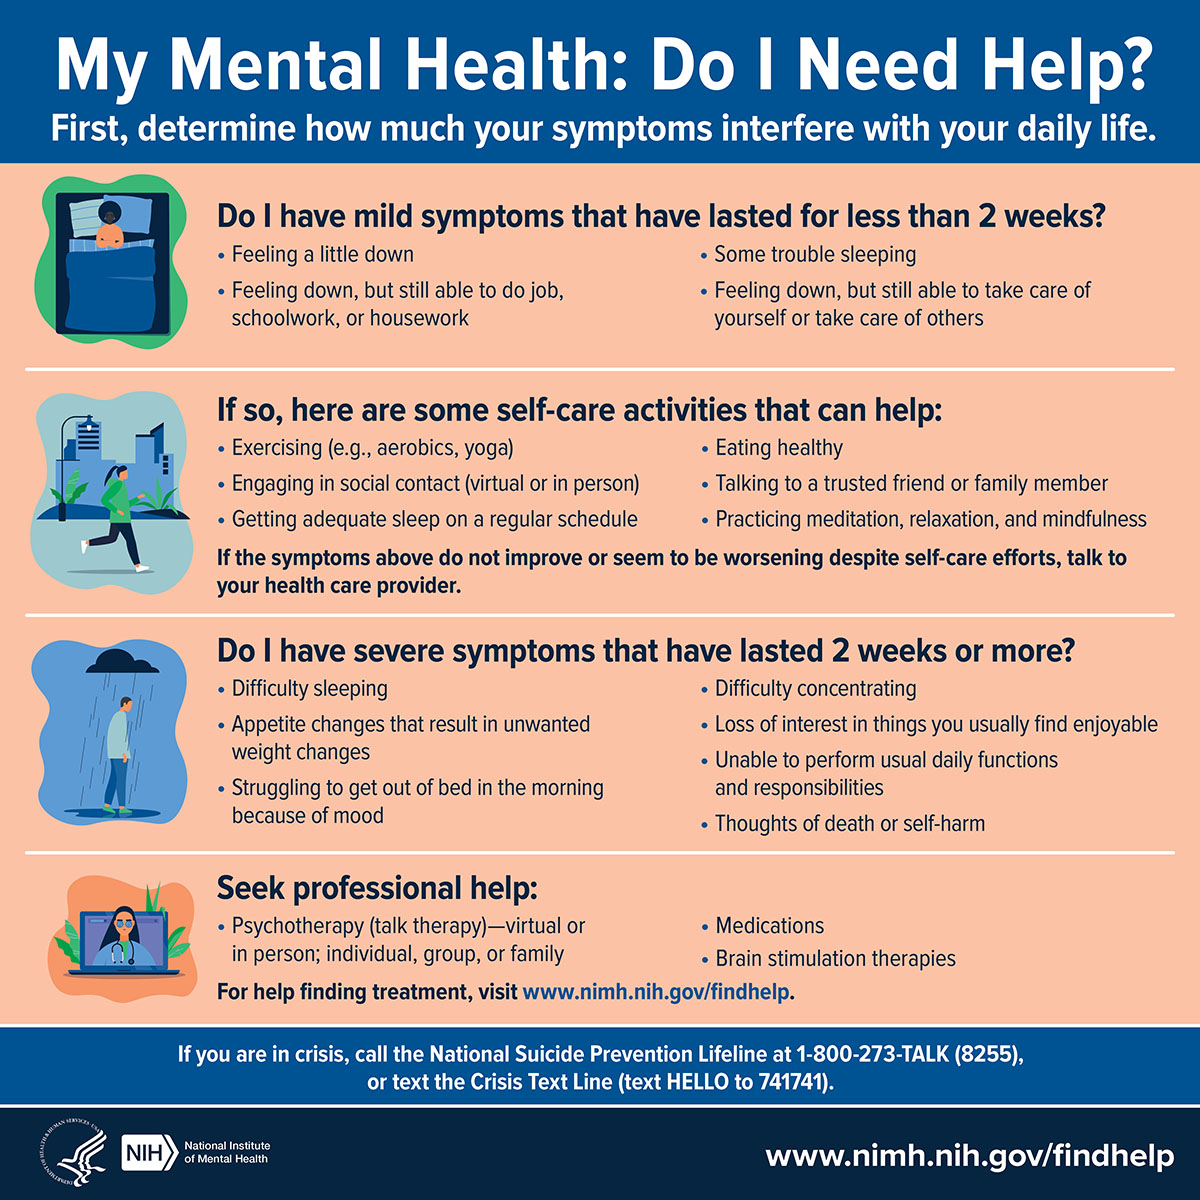 Presents information about how to assess your mental health and determine if you need help. It provides examples of mild and severe symptoms, as well as self-care activities and options for professional help. Points to www.nimh.nih.gov/findhelp.